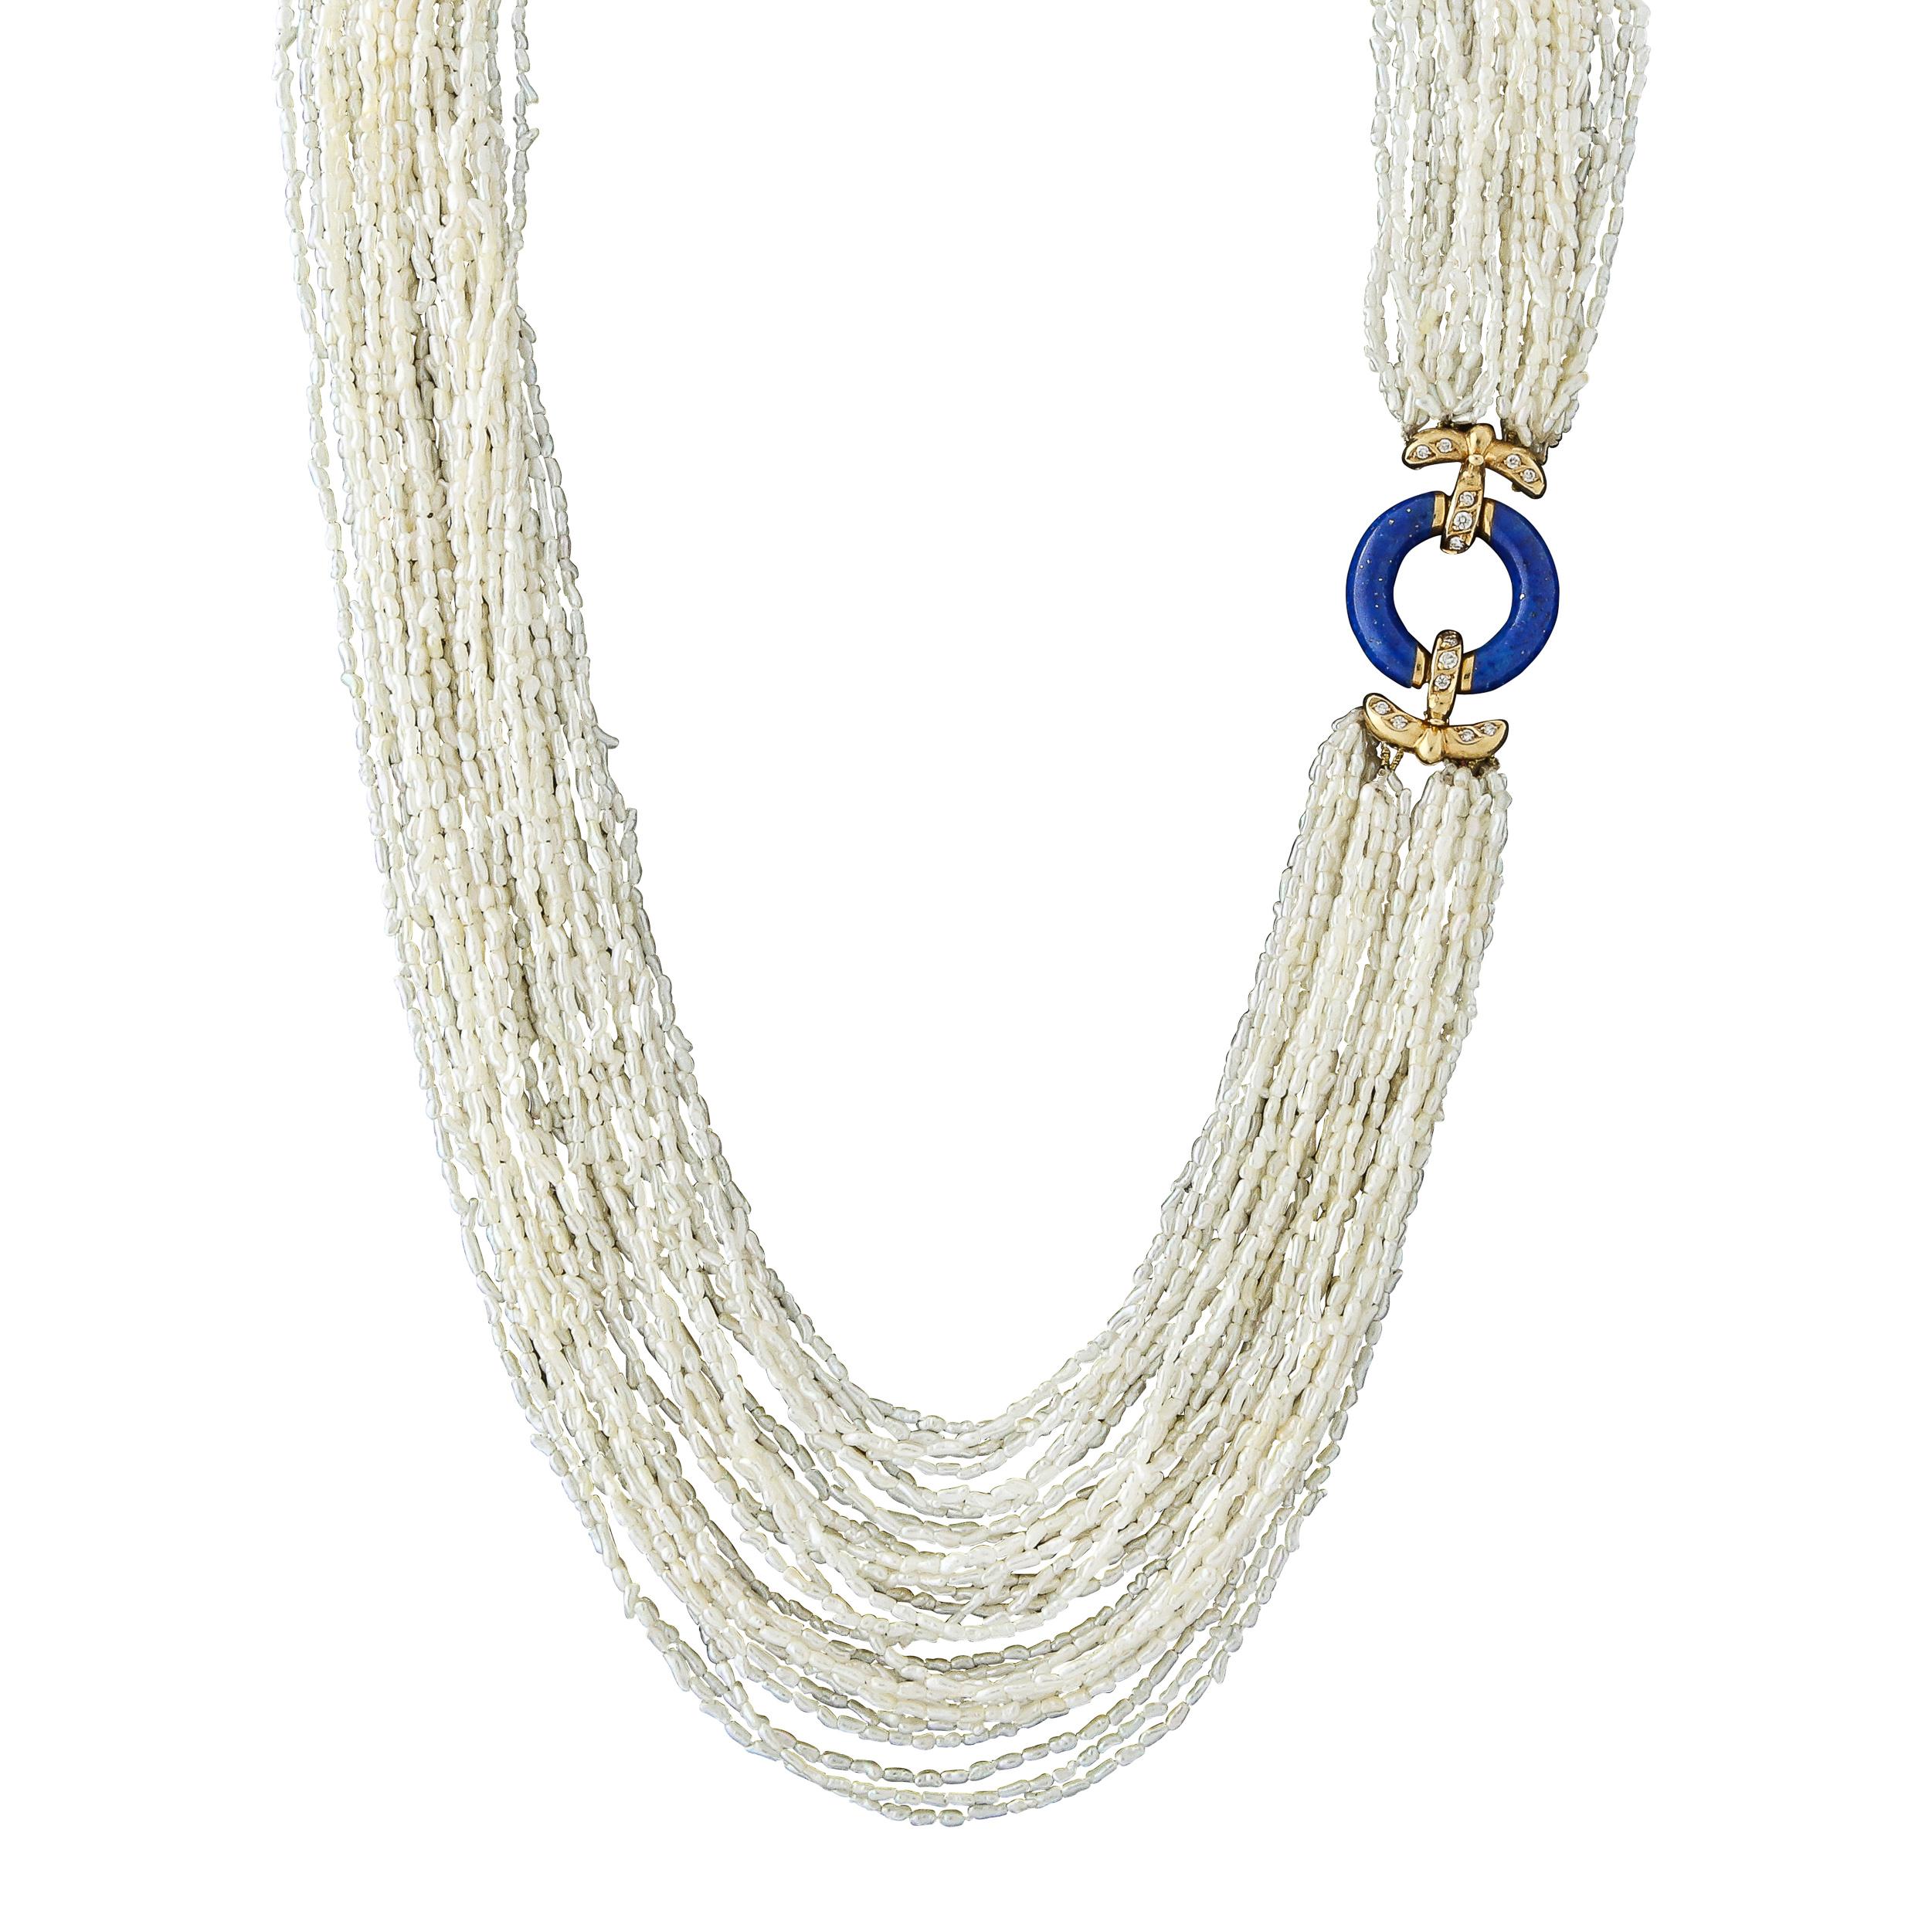 This very elegant multi strand white seed pearl necklace is fitted with a 14k yellow gold clasp set with lapis lazuli and 14 single cut diamonds. The clasp can be worn in the front or in the back which changes the look of the piece to more casual or